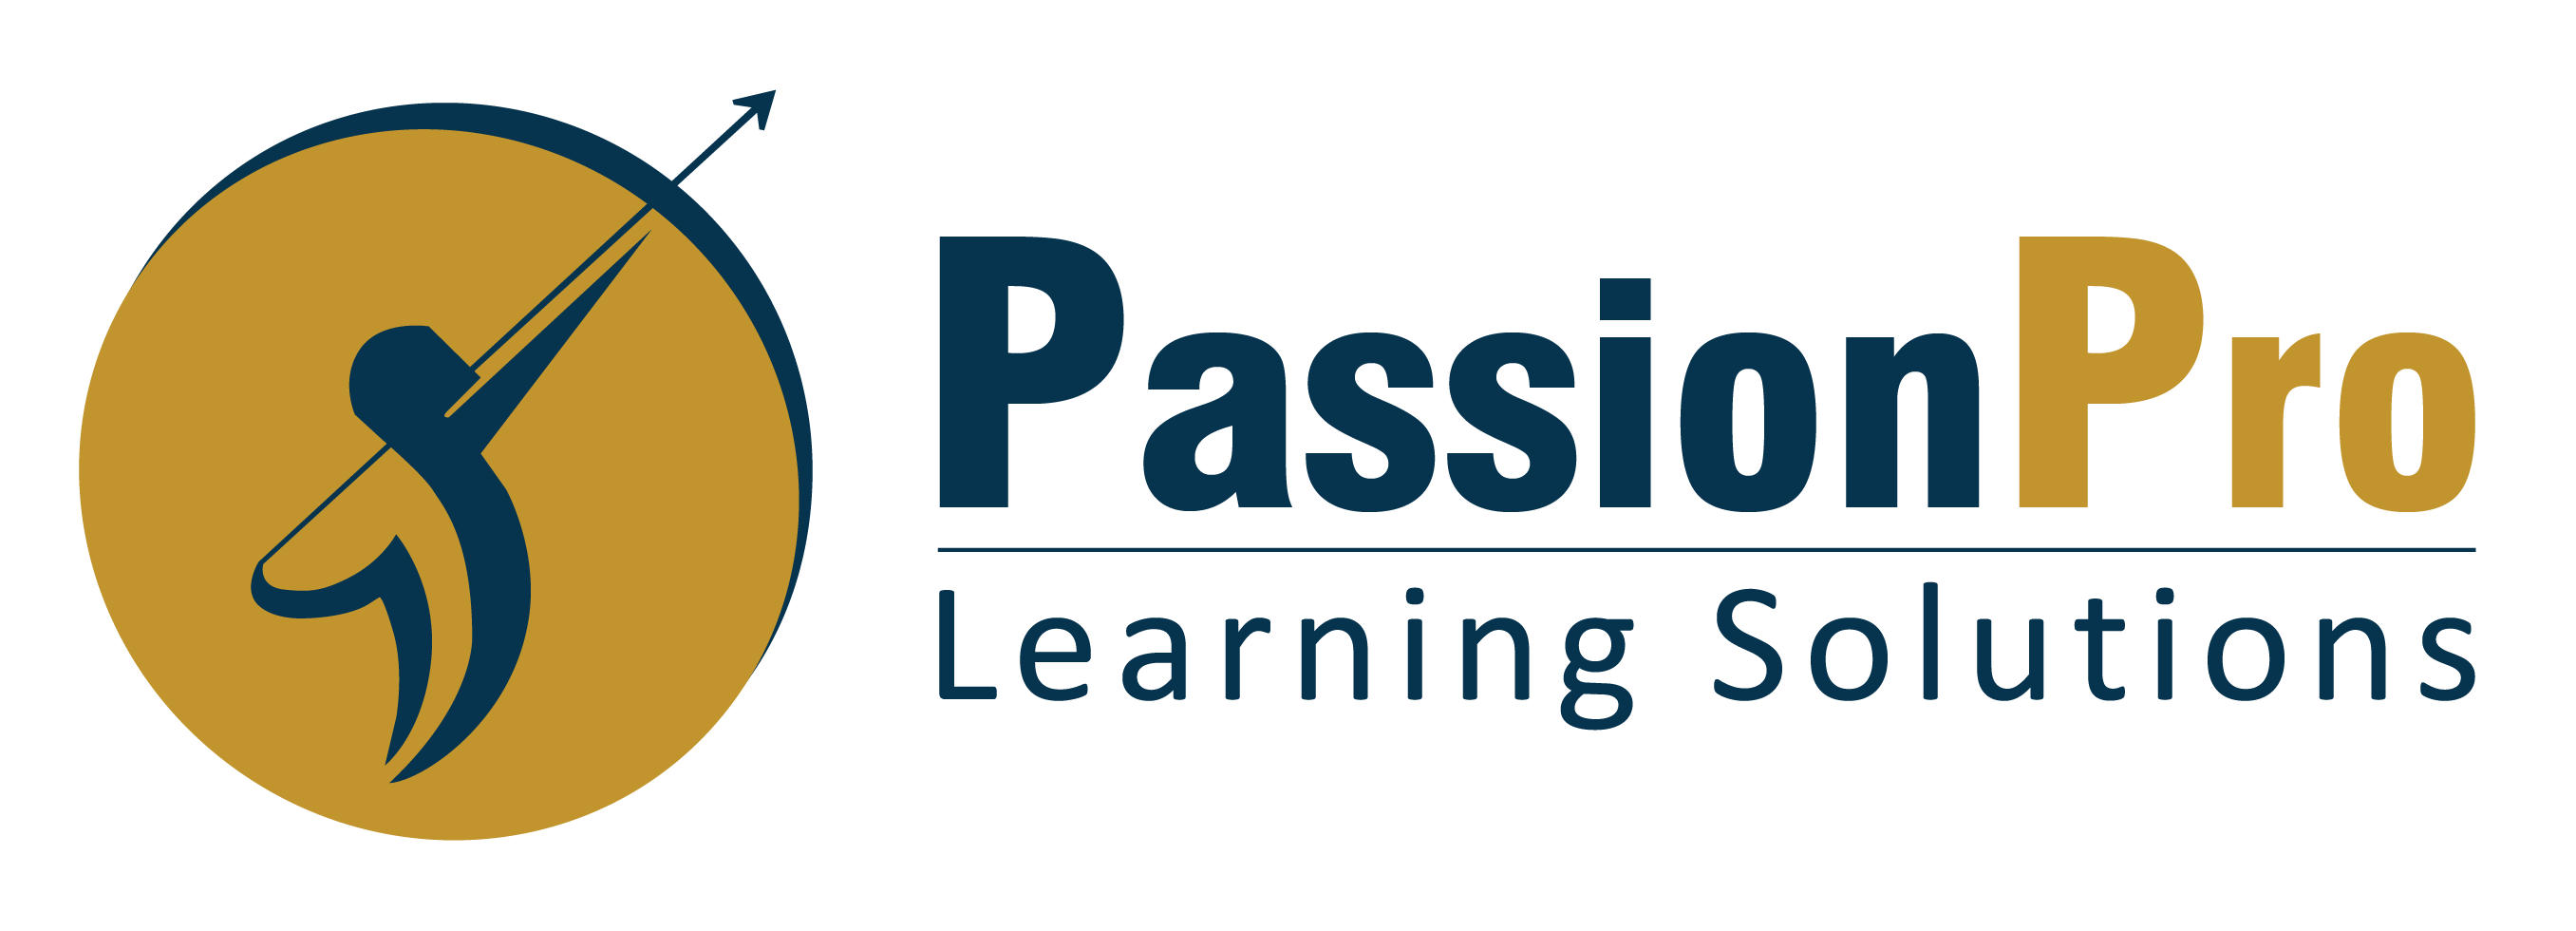 PassionPro Learning Solutions